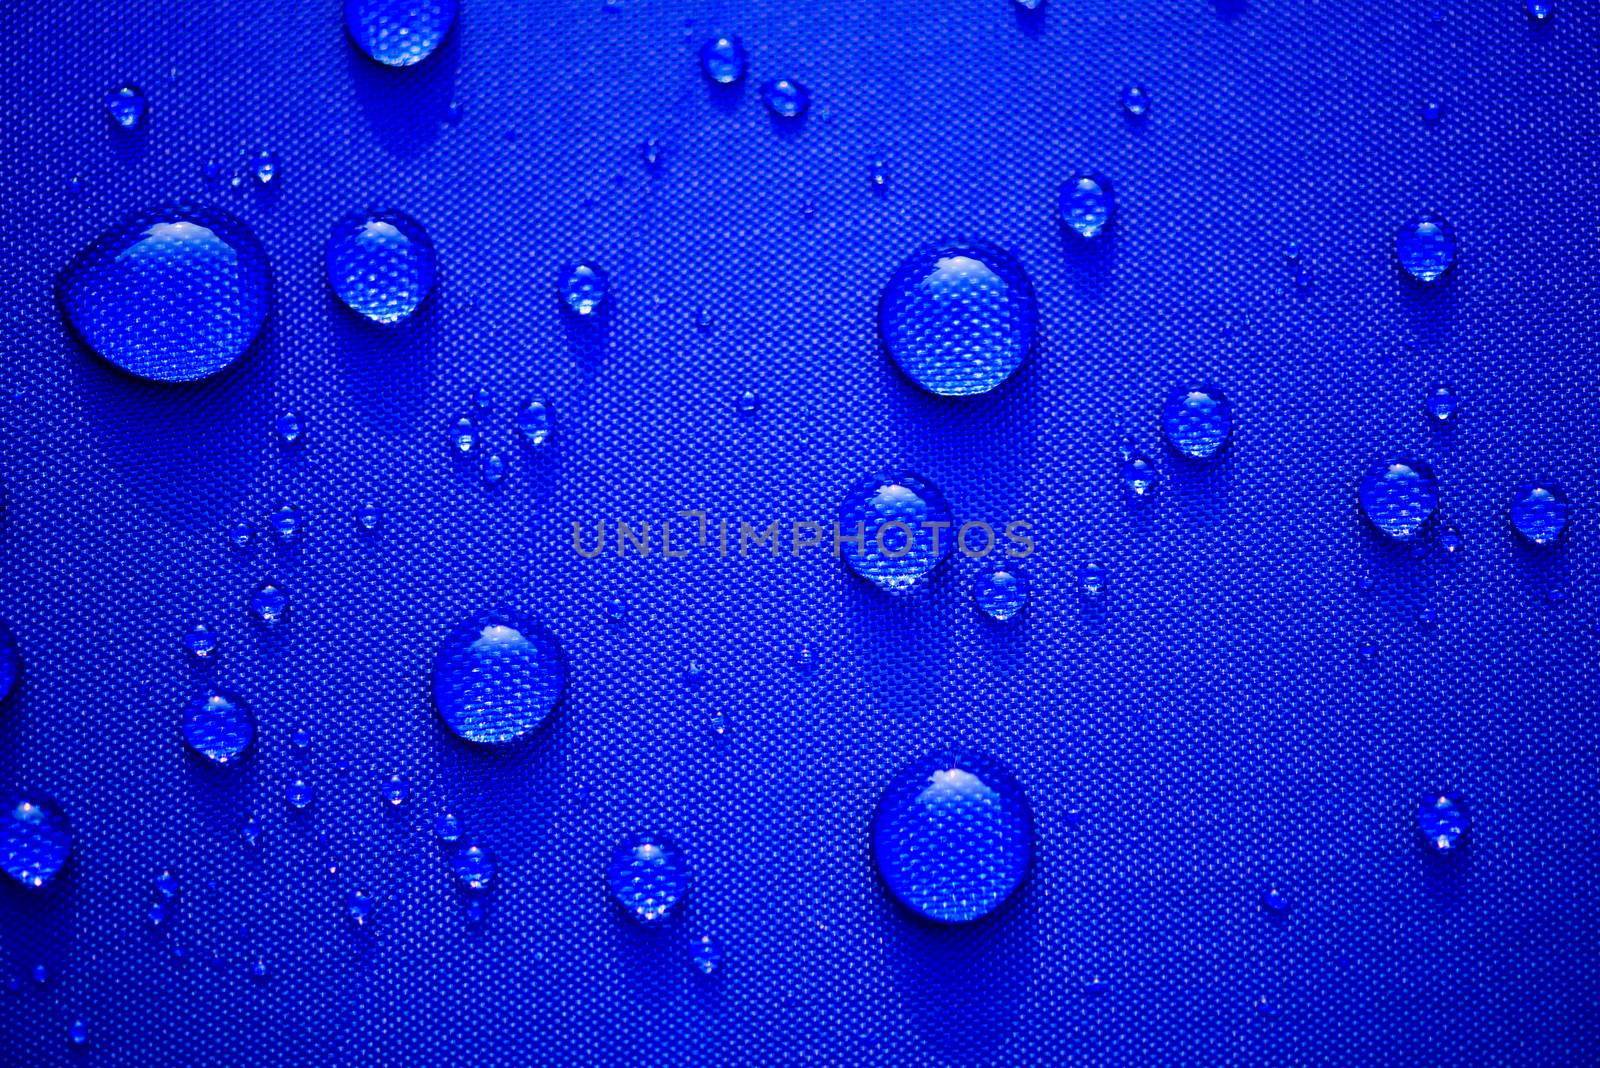 Close up Water drops pattern over a blue waterproof cloth background. World Water Day concept.